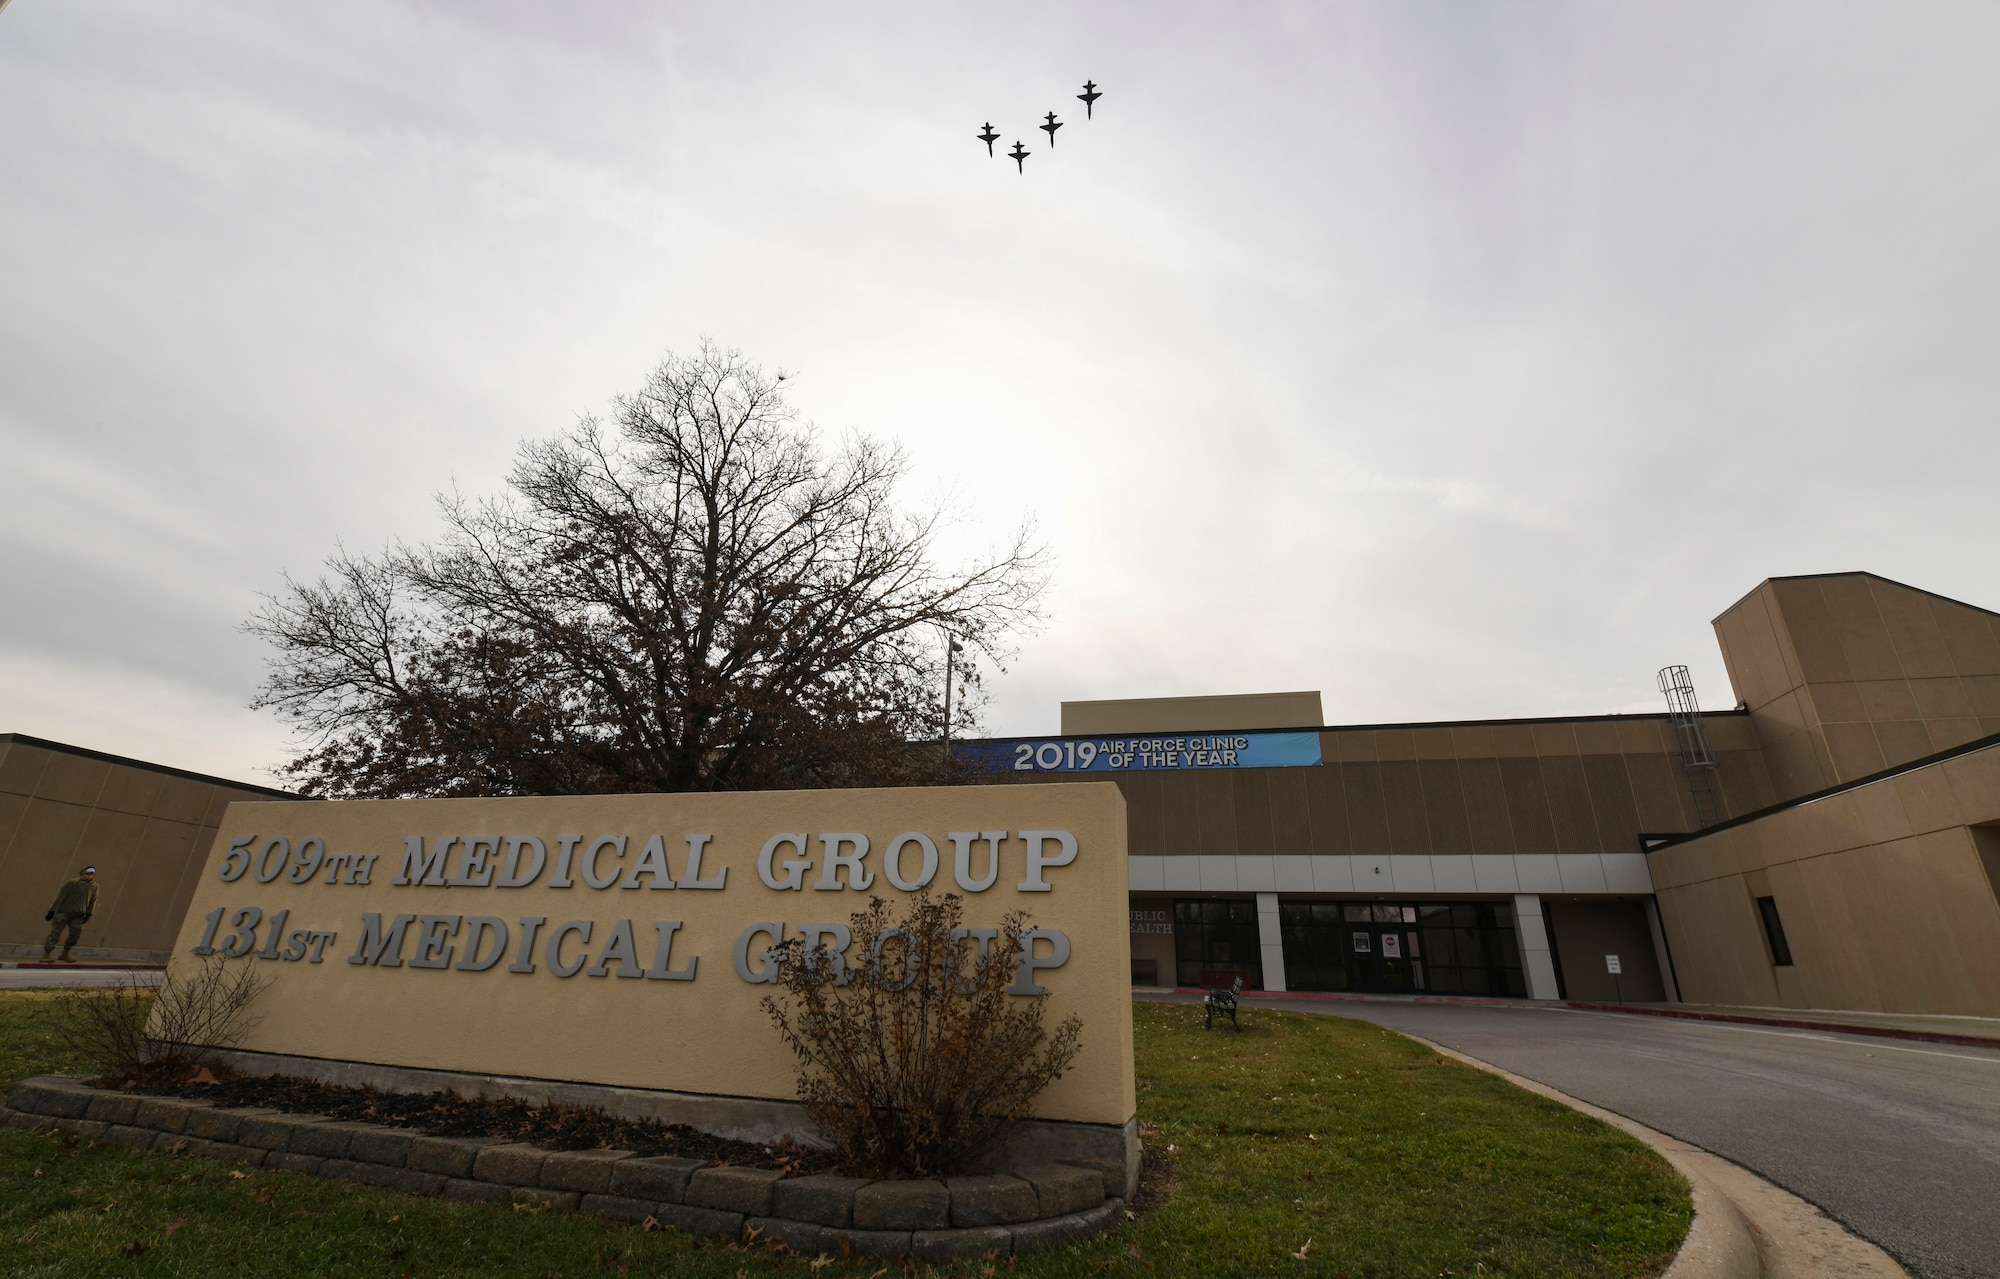 Four T-38 Talons, assigned to the 509th Bomb Wing flew over the 509th Medical Group clinic to honor the health care professionals for Air Force Global Strike Command’s Medical Professionals Appreciation Day at Whiteman Air Force Base, Missouri, Dec. 18, 2020. The flyover served as part of an effort to thank the 509th MDG staff for their hard work over the past year in the fight against COVID-19. (U.S. Air Force photo by Tech. Sgt. Heather Salazar)